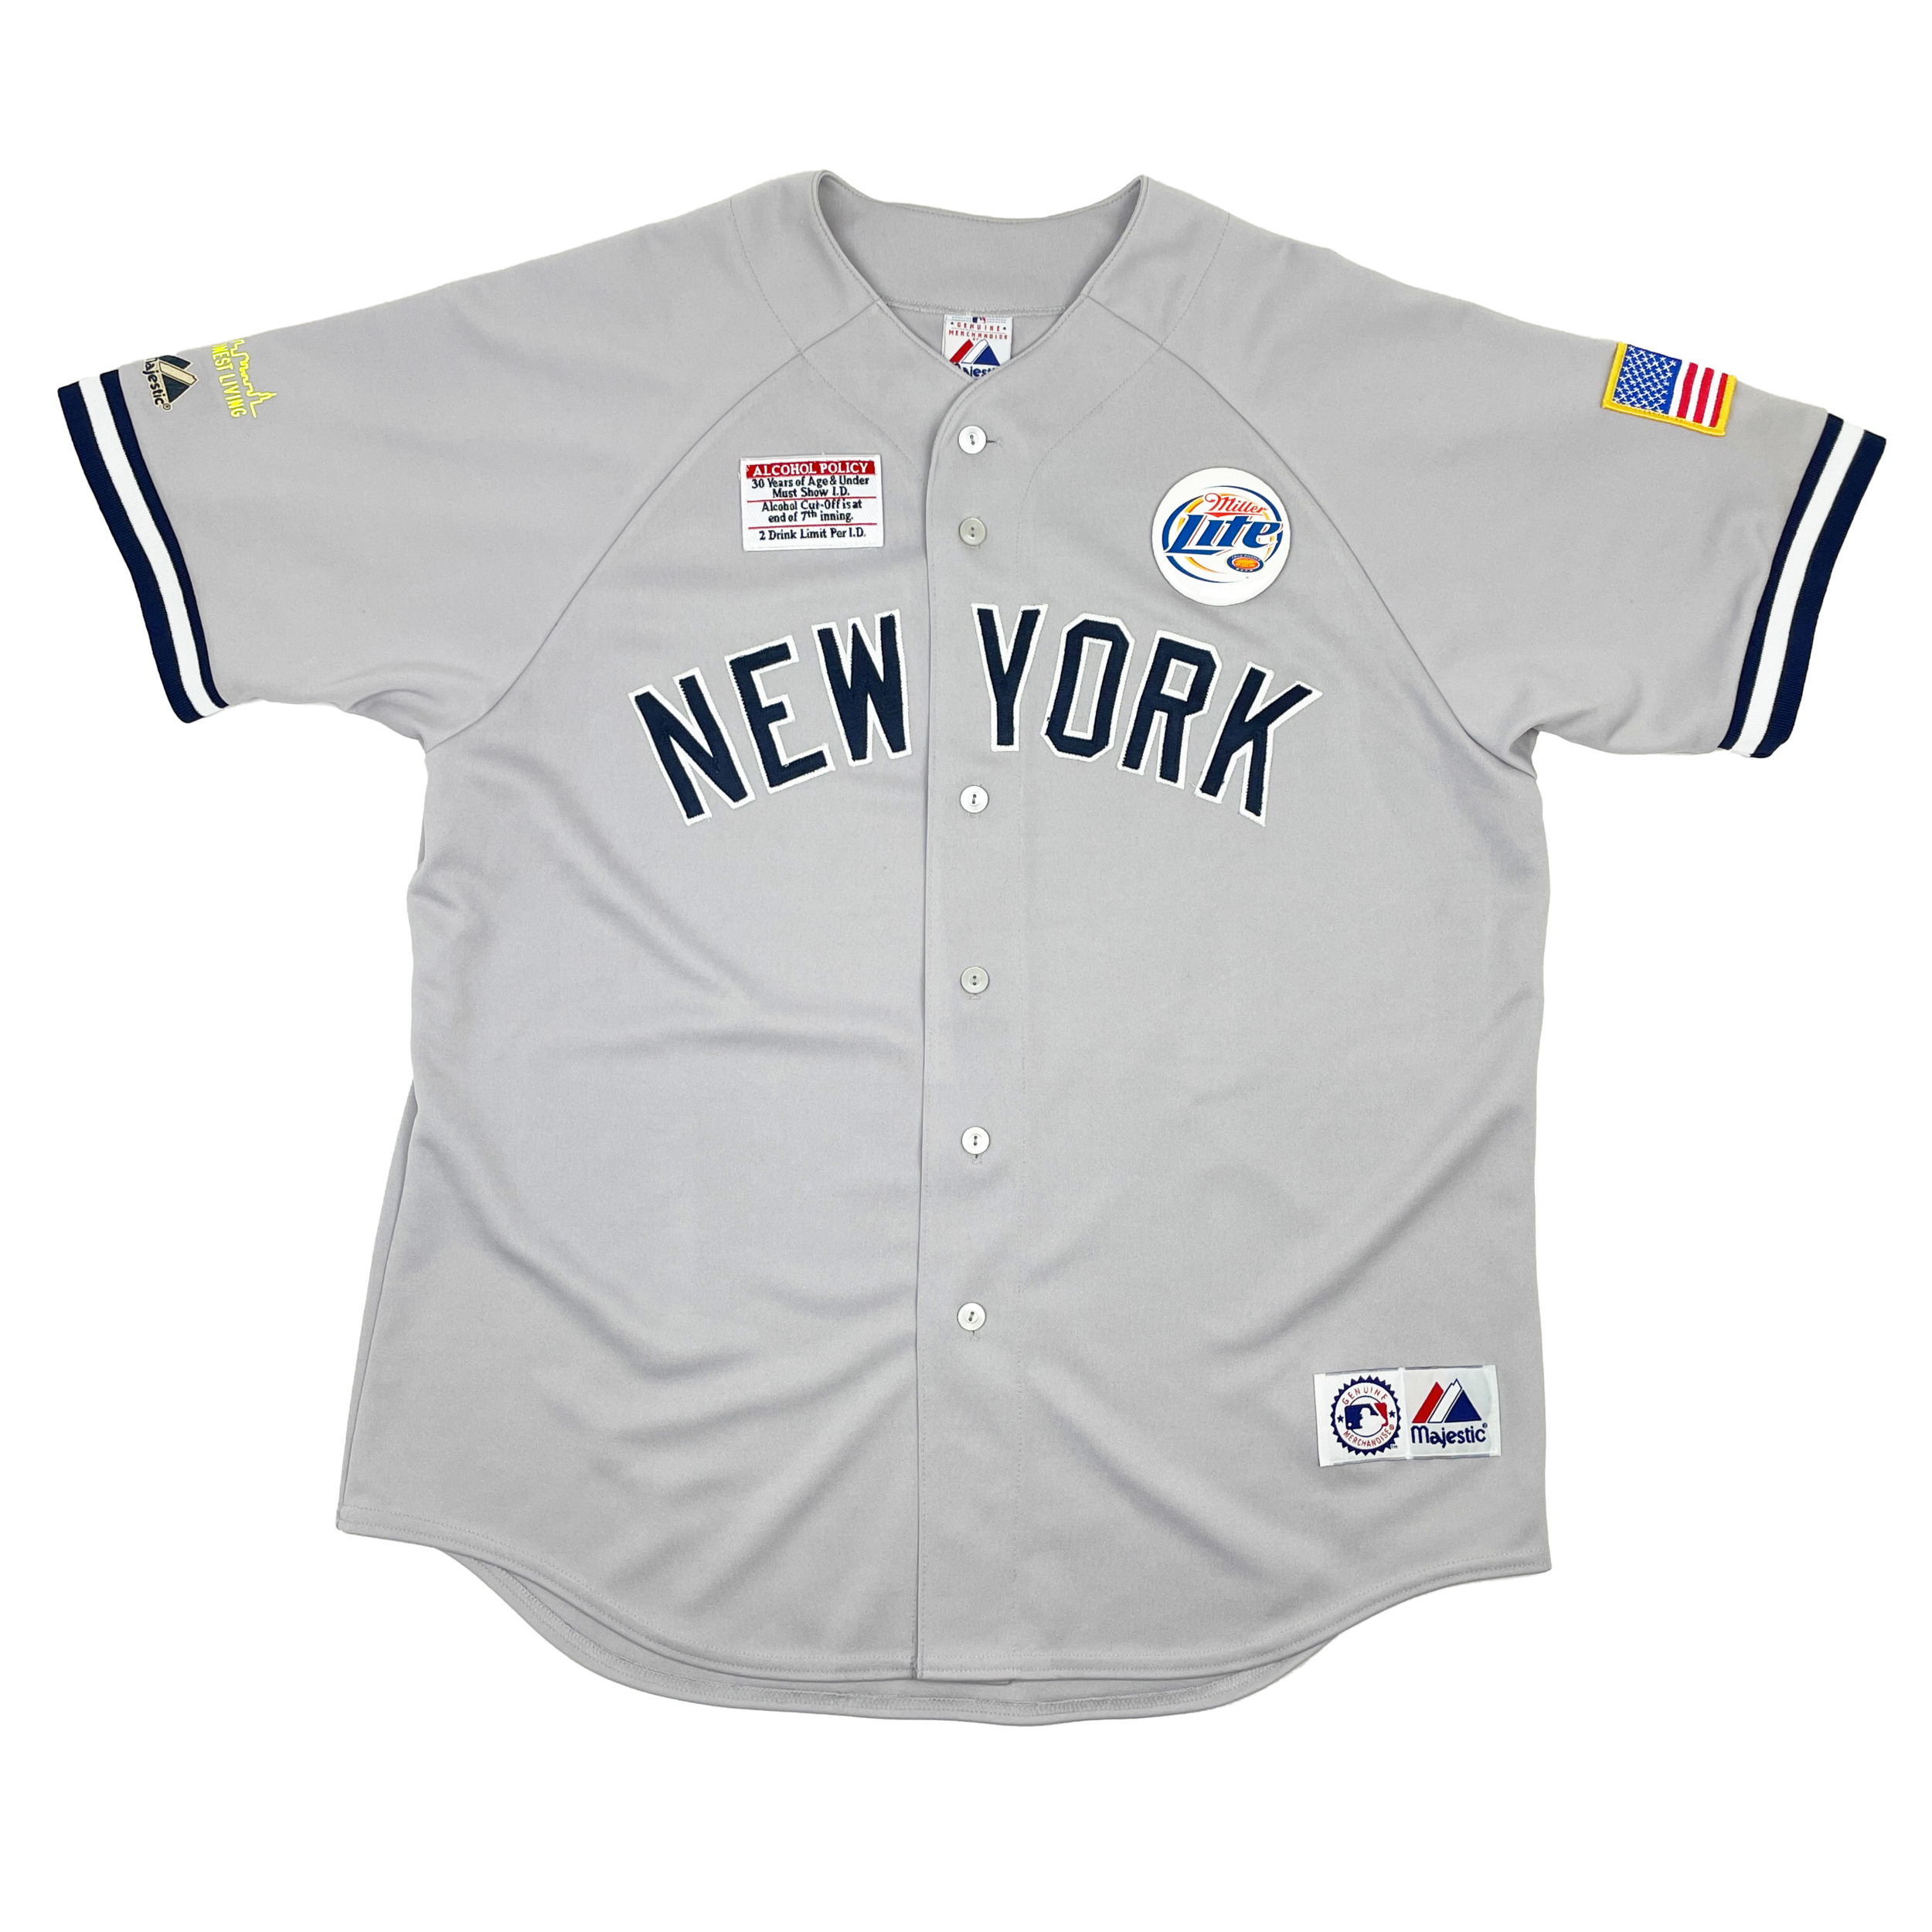 Collectible New York Yankees Jerseys for sale near Up the Grove